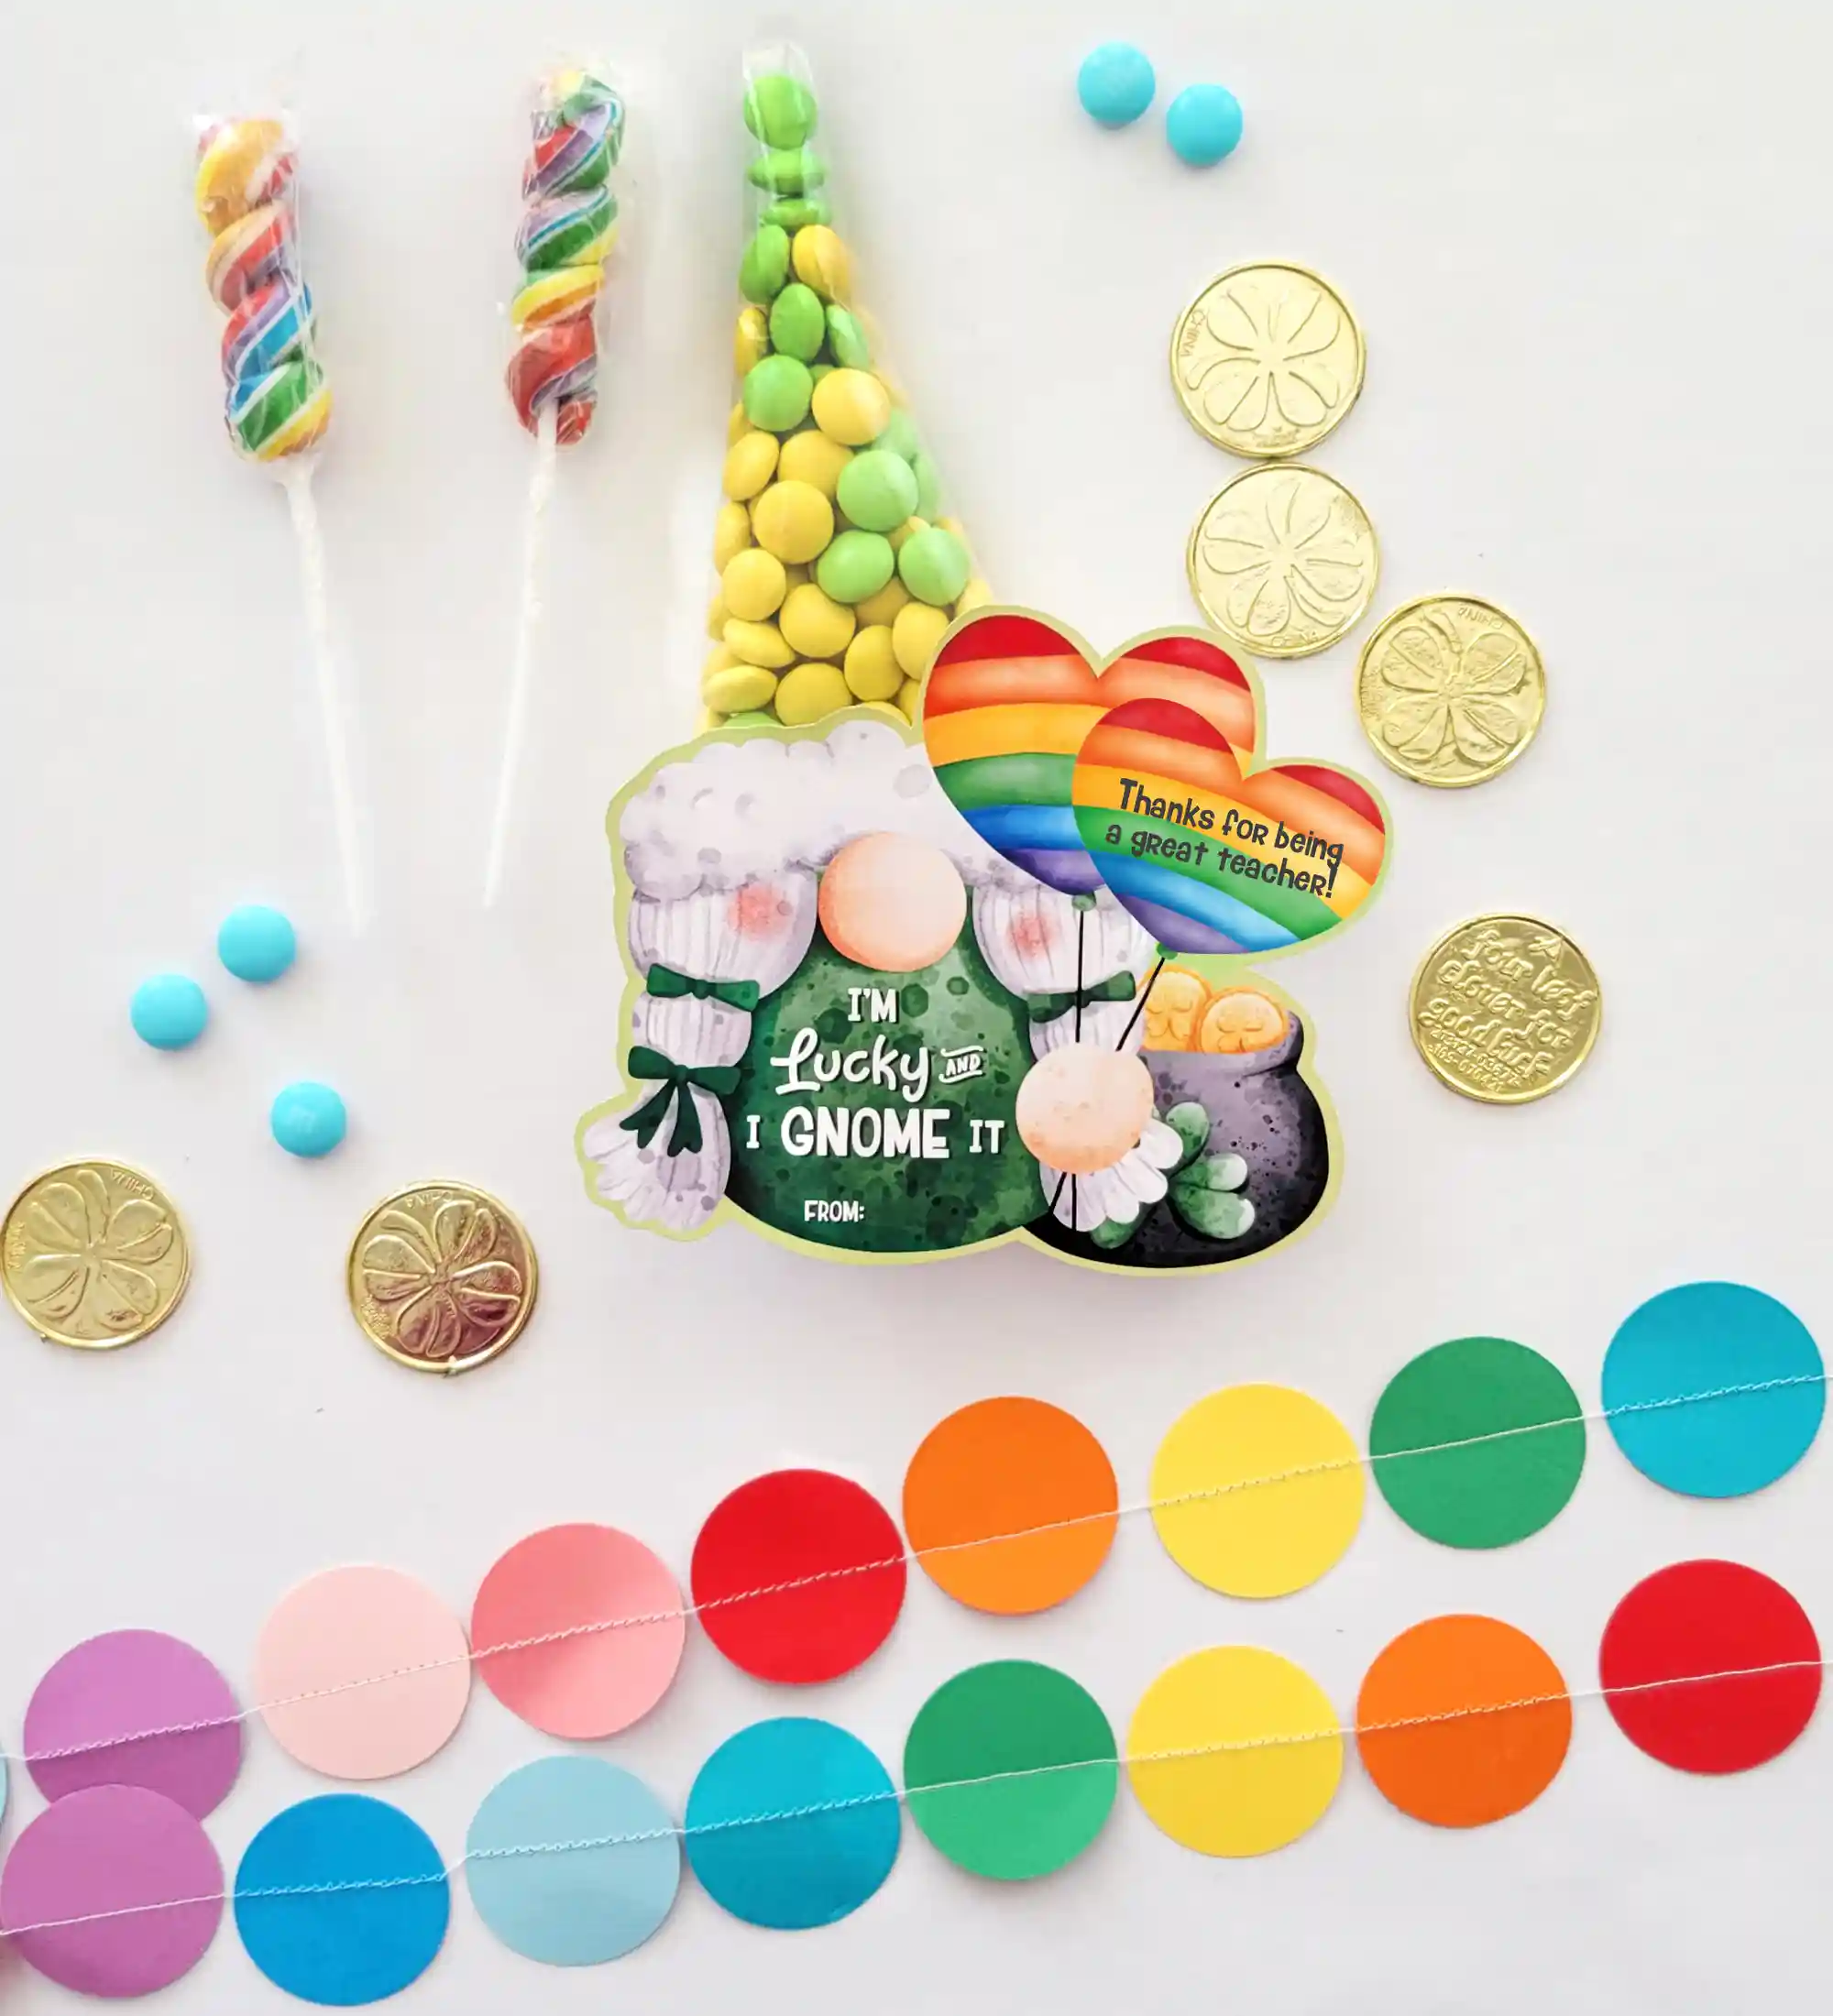 Printable St. Patrick's Day gift tag for a fun and easy gift for St. Patrick's Day. Gfit tag says: "I'm Lucky and I Gnome It. Thanks for being a great teacher!" Attach gift tag to a small bag of St. Patrick's Day treats like M&Ms, skittles, etc. to make the gnome's hat.